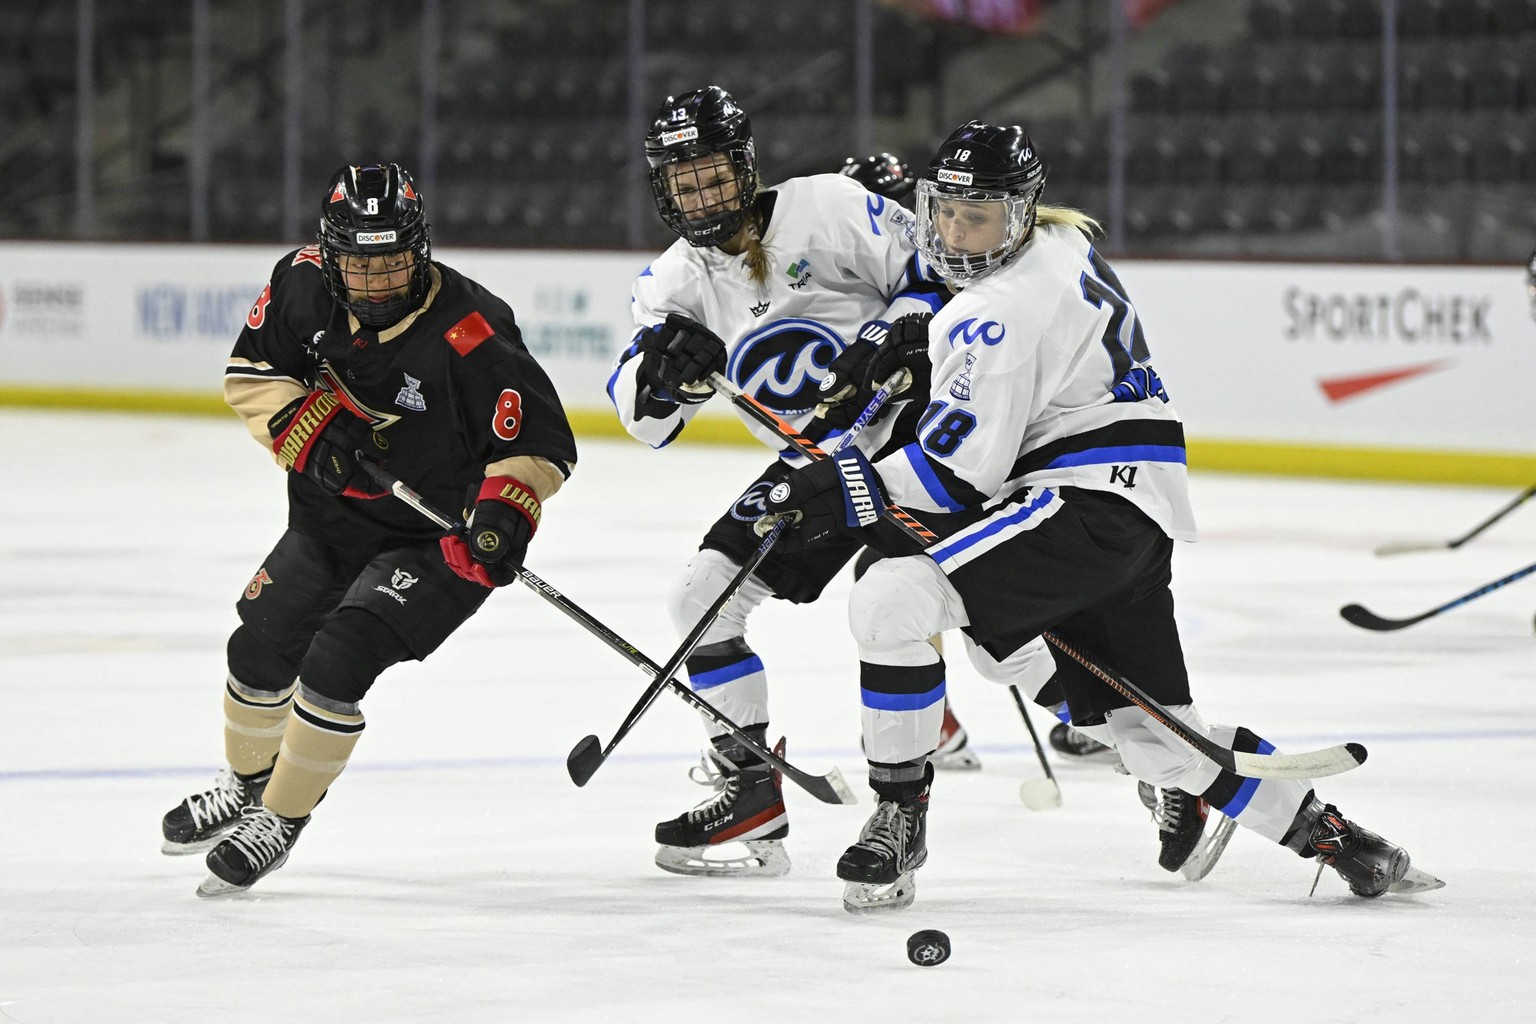 TEMPE, AZ - MARCH 26: Toronto Six forward Leah Lum 8 and Minnesota Whitecaps forward Stephanie Anderson 18 eye a loose puck during the Isobel Cup Final between the Minnesota Whitecaps and Toronto Six  ...